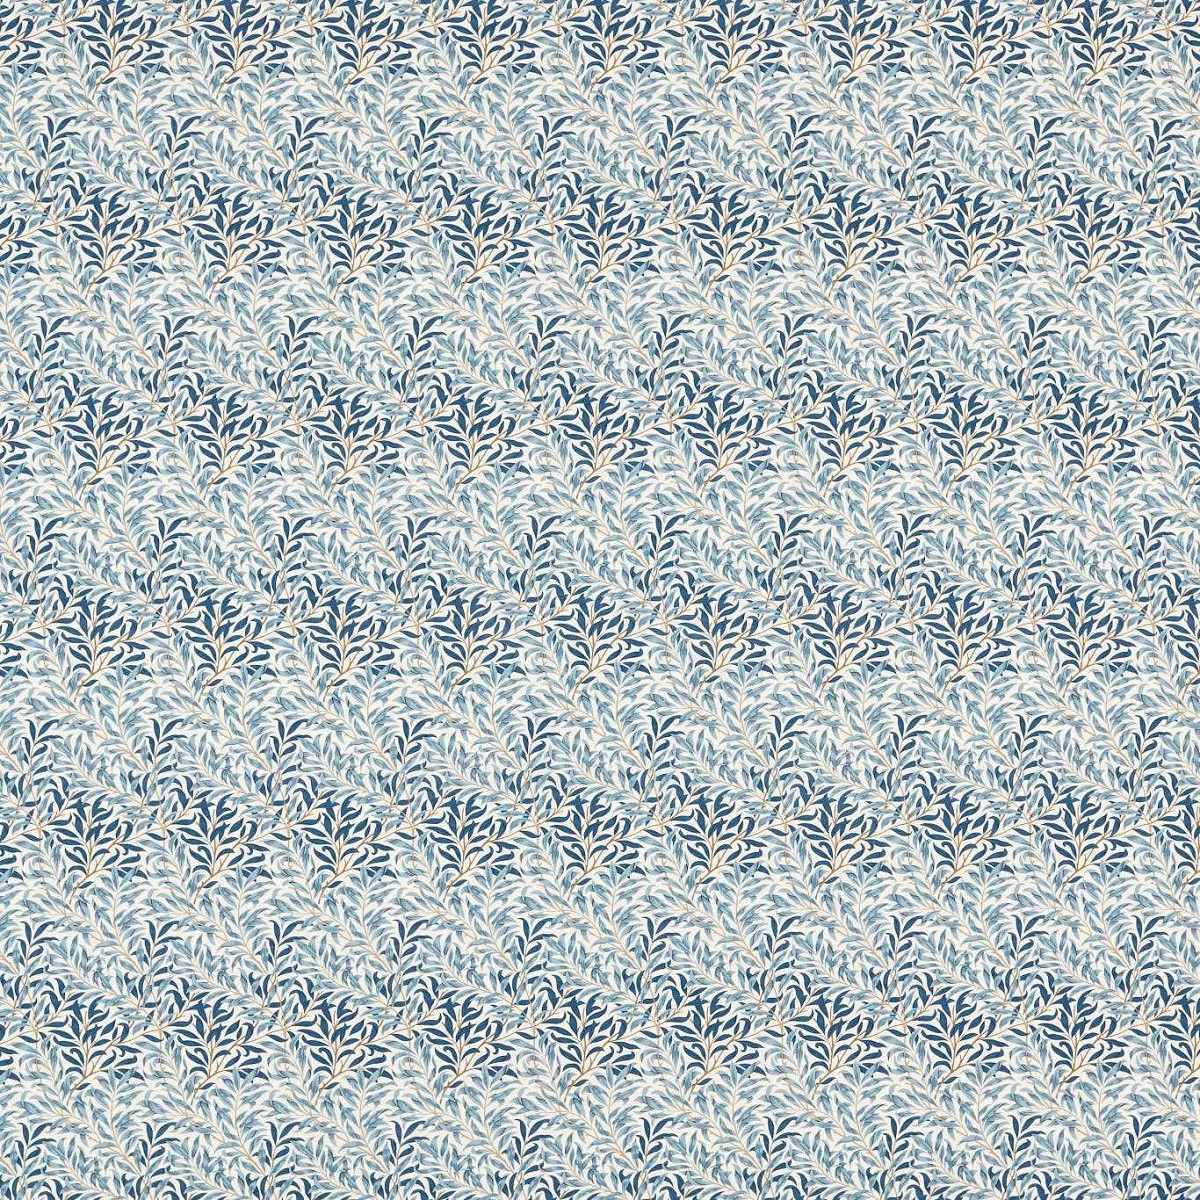 Willow Bough Minor Woad Fabric by William Morris & Co.